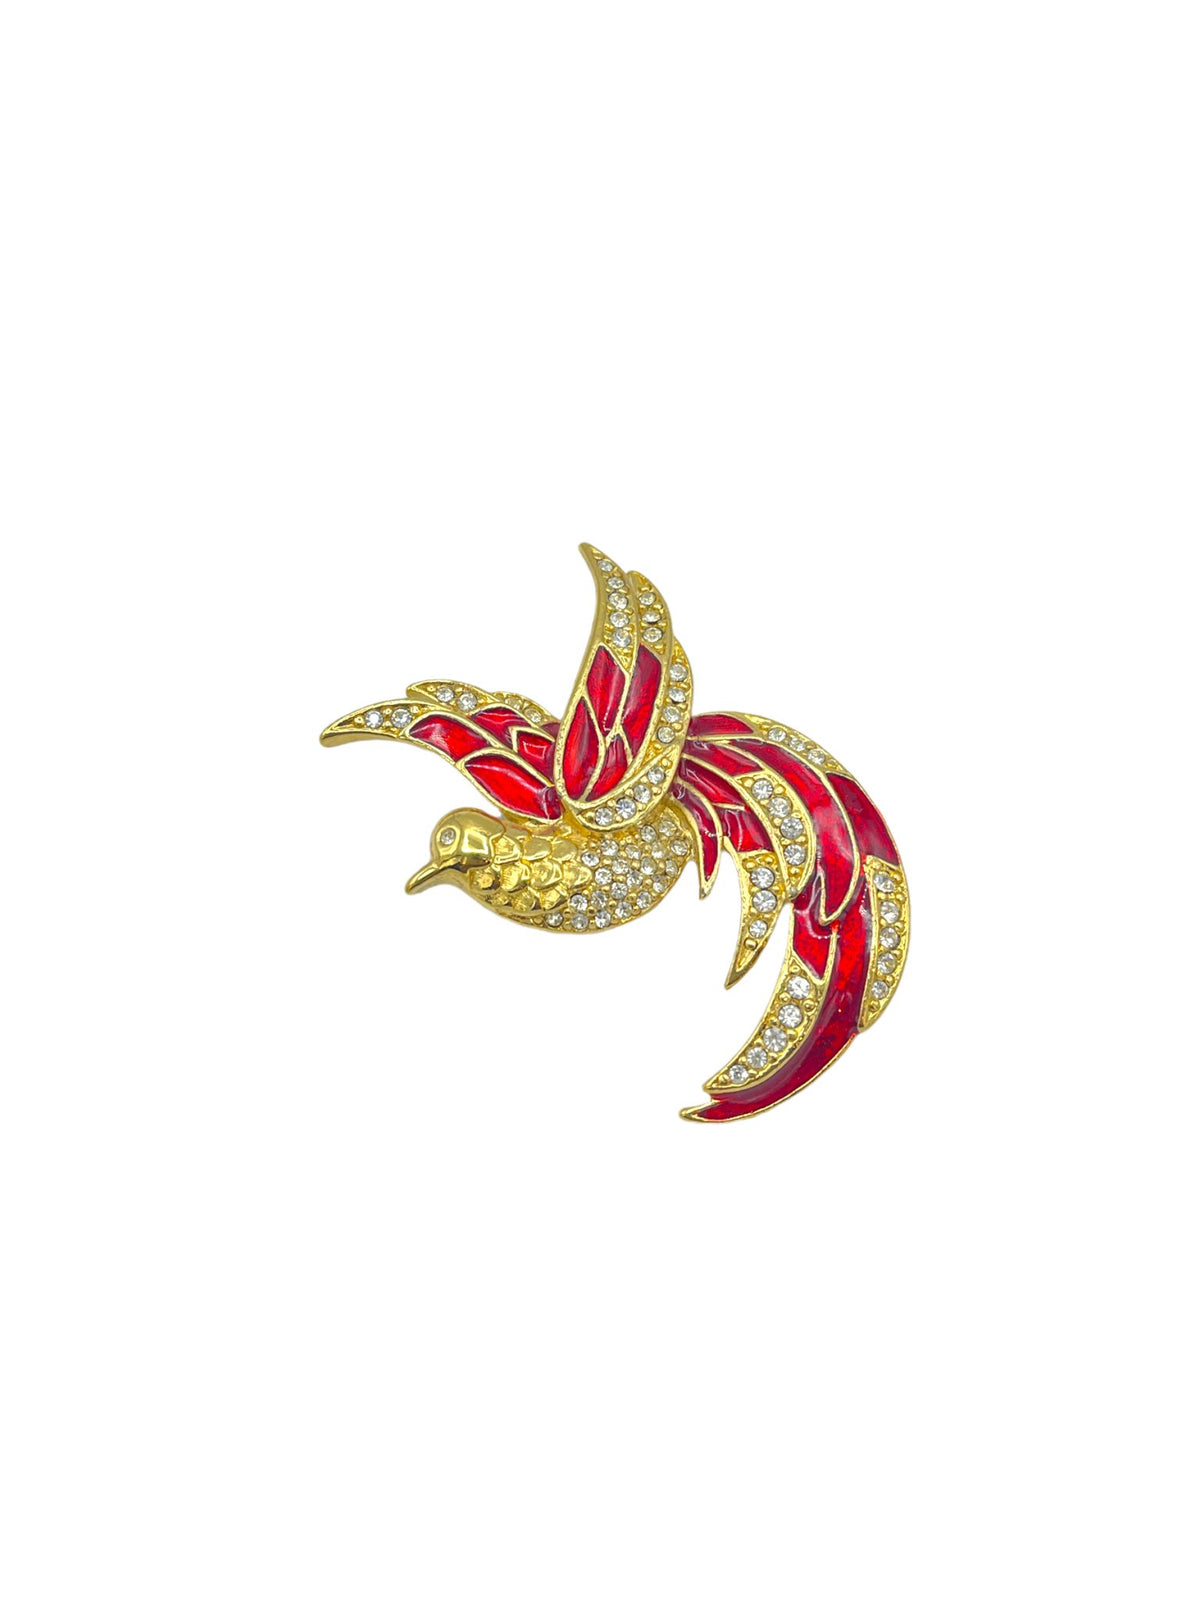 Giorgio Gold Red Enamel Bird of Paradise Vintage Designer Brooch - 24 Wishes Vintage Jewelry